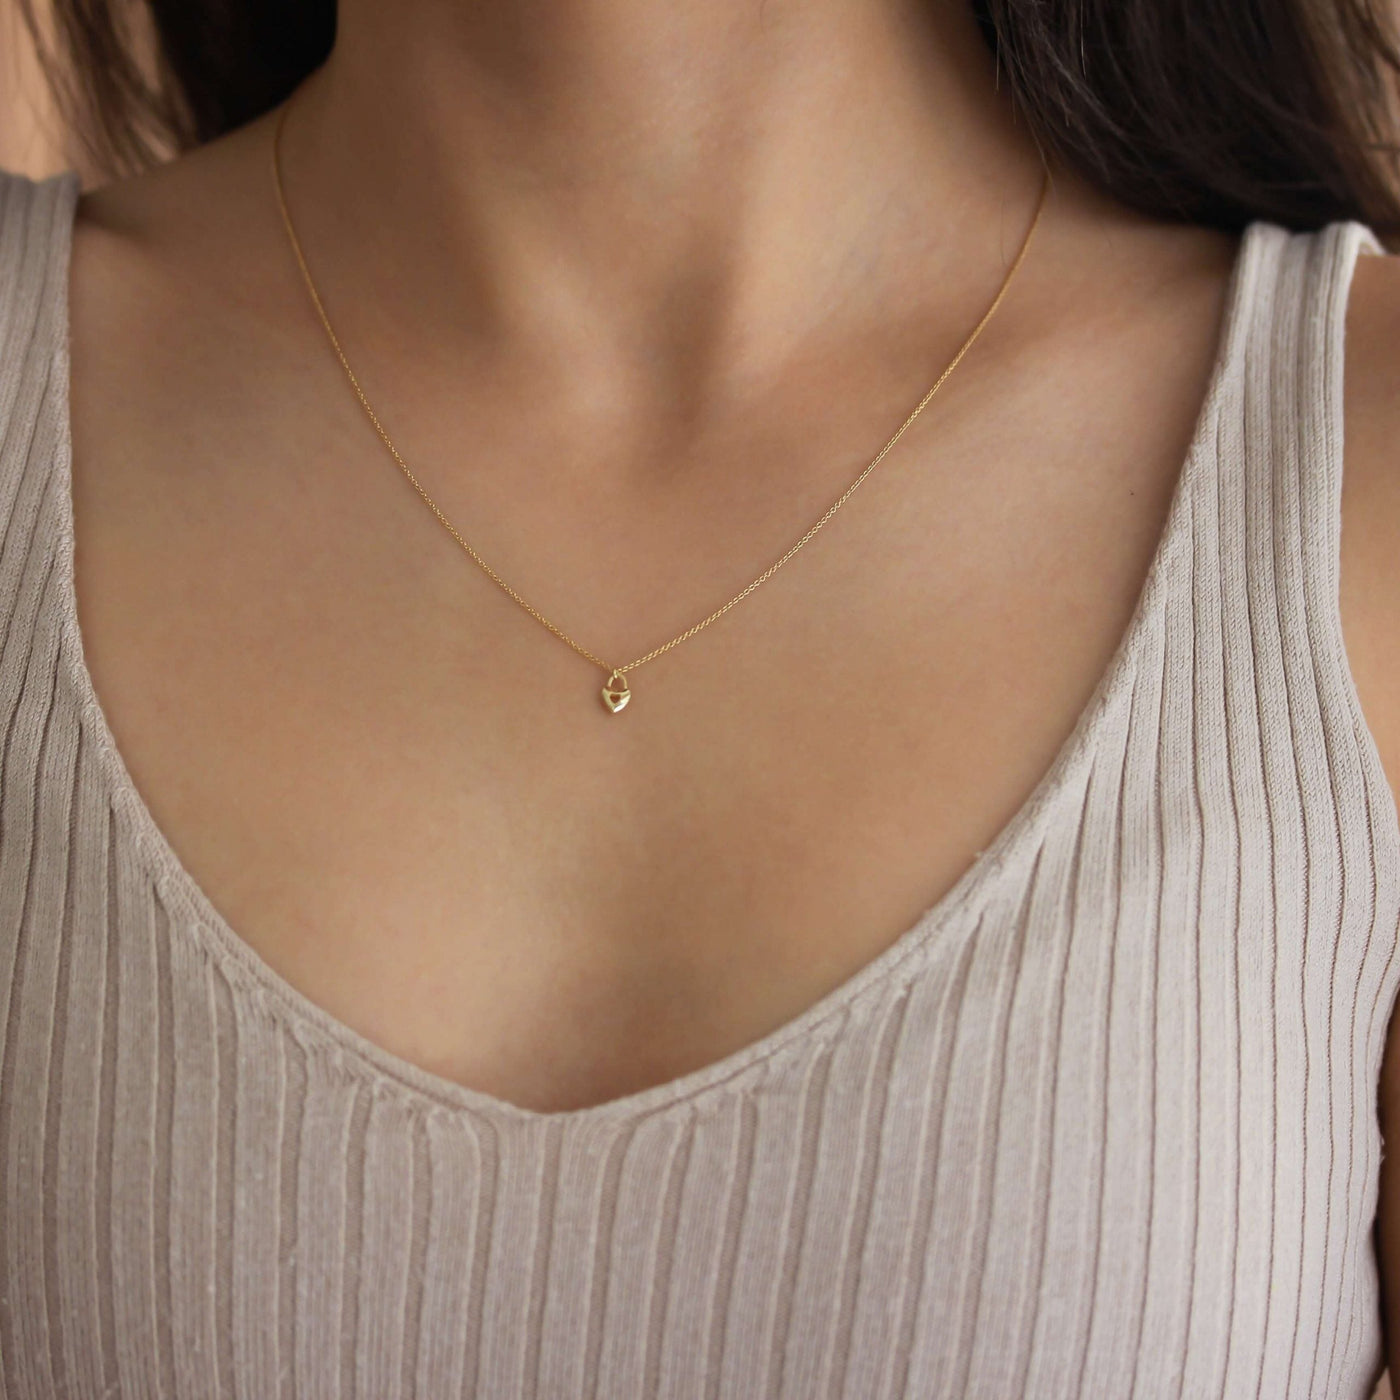 New Tiny Heart Necklace 14K Gold Necklaces 